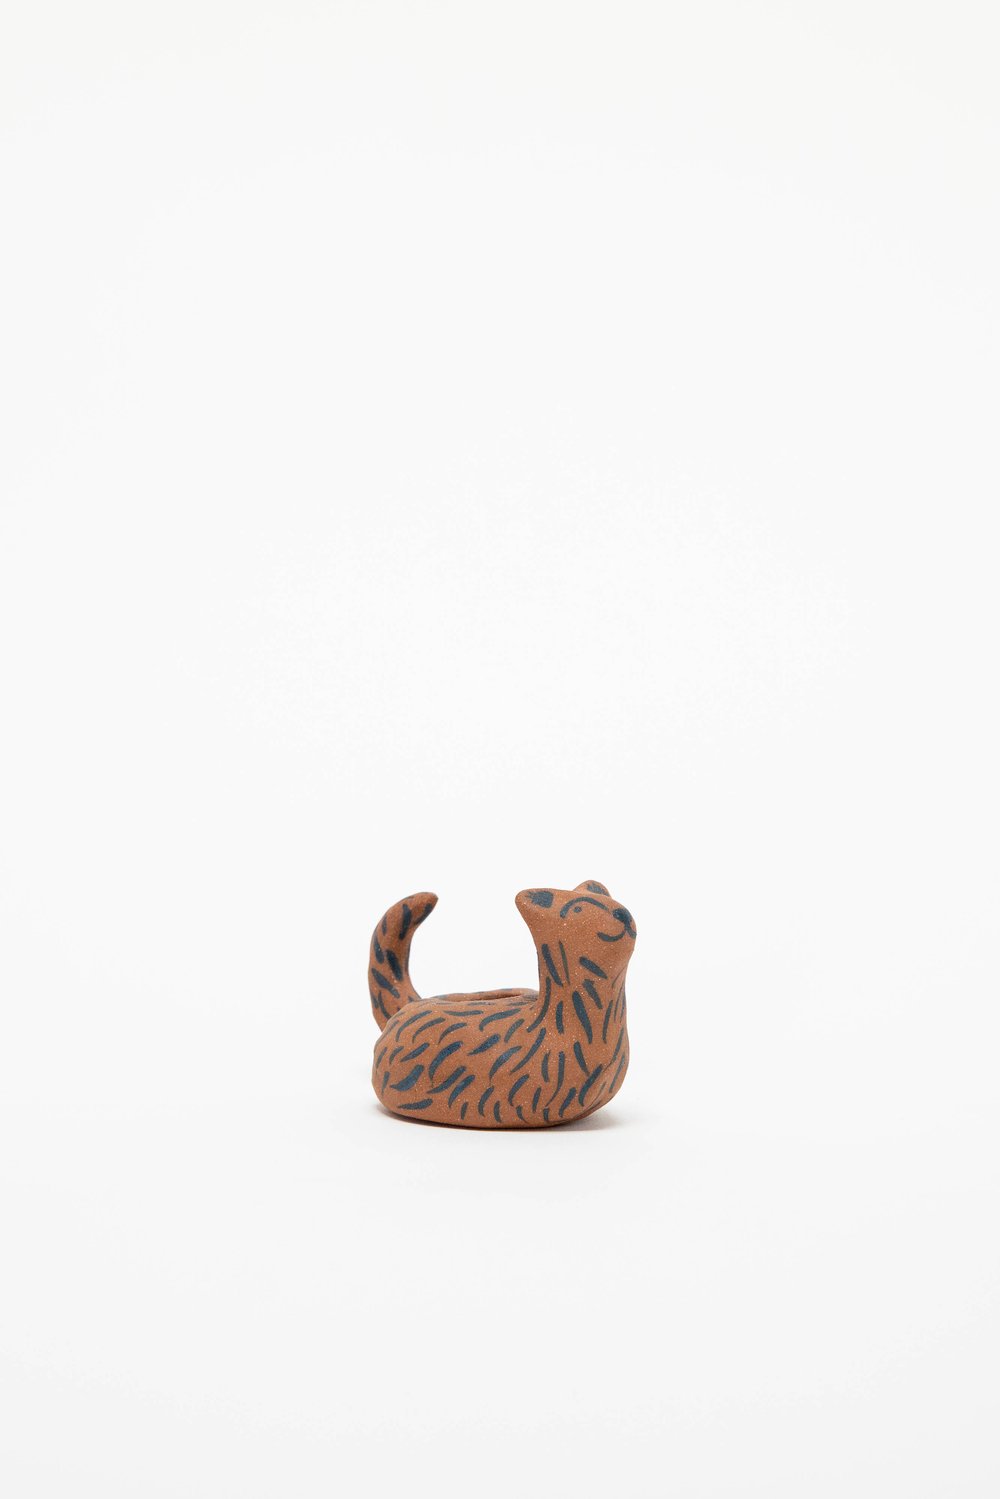 Image of Creature Candle Holder- no.7